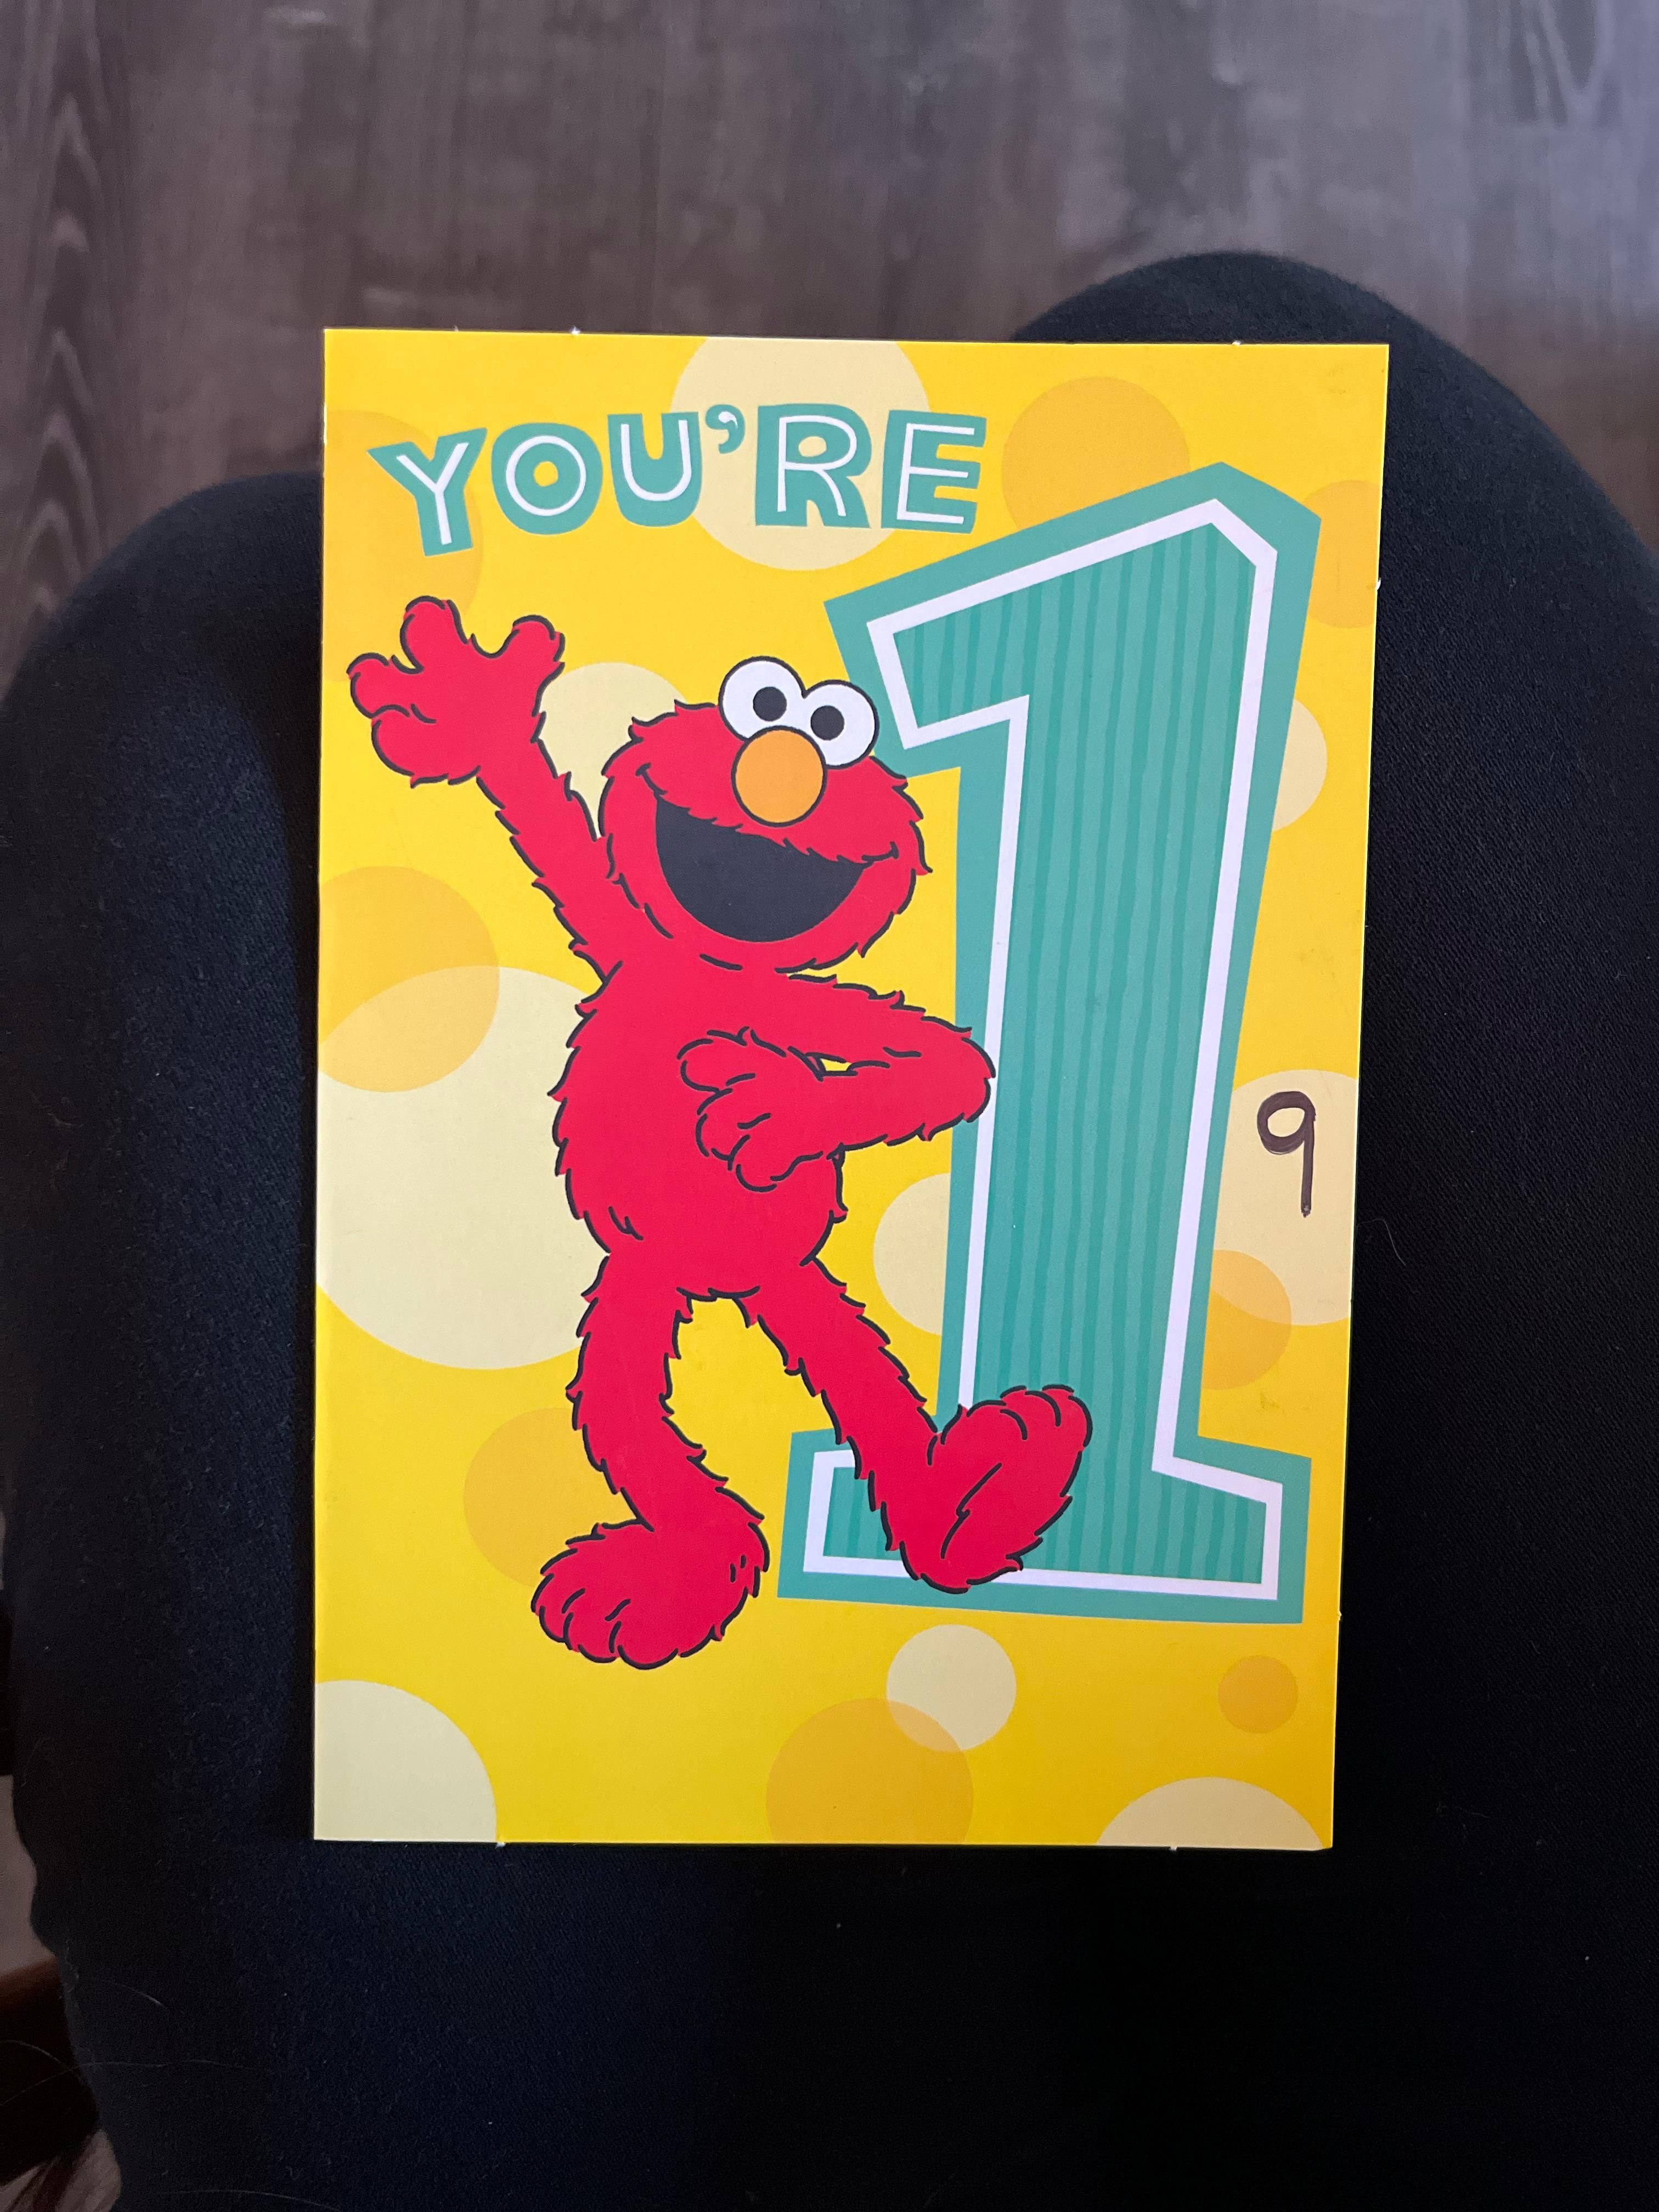 what can I write inside this card for my brothers 19th birthday?